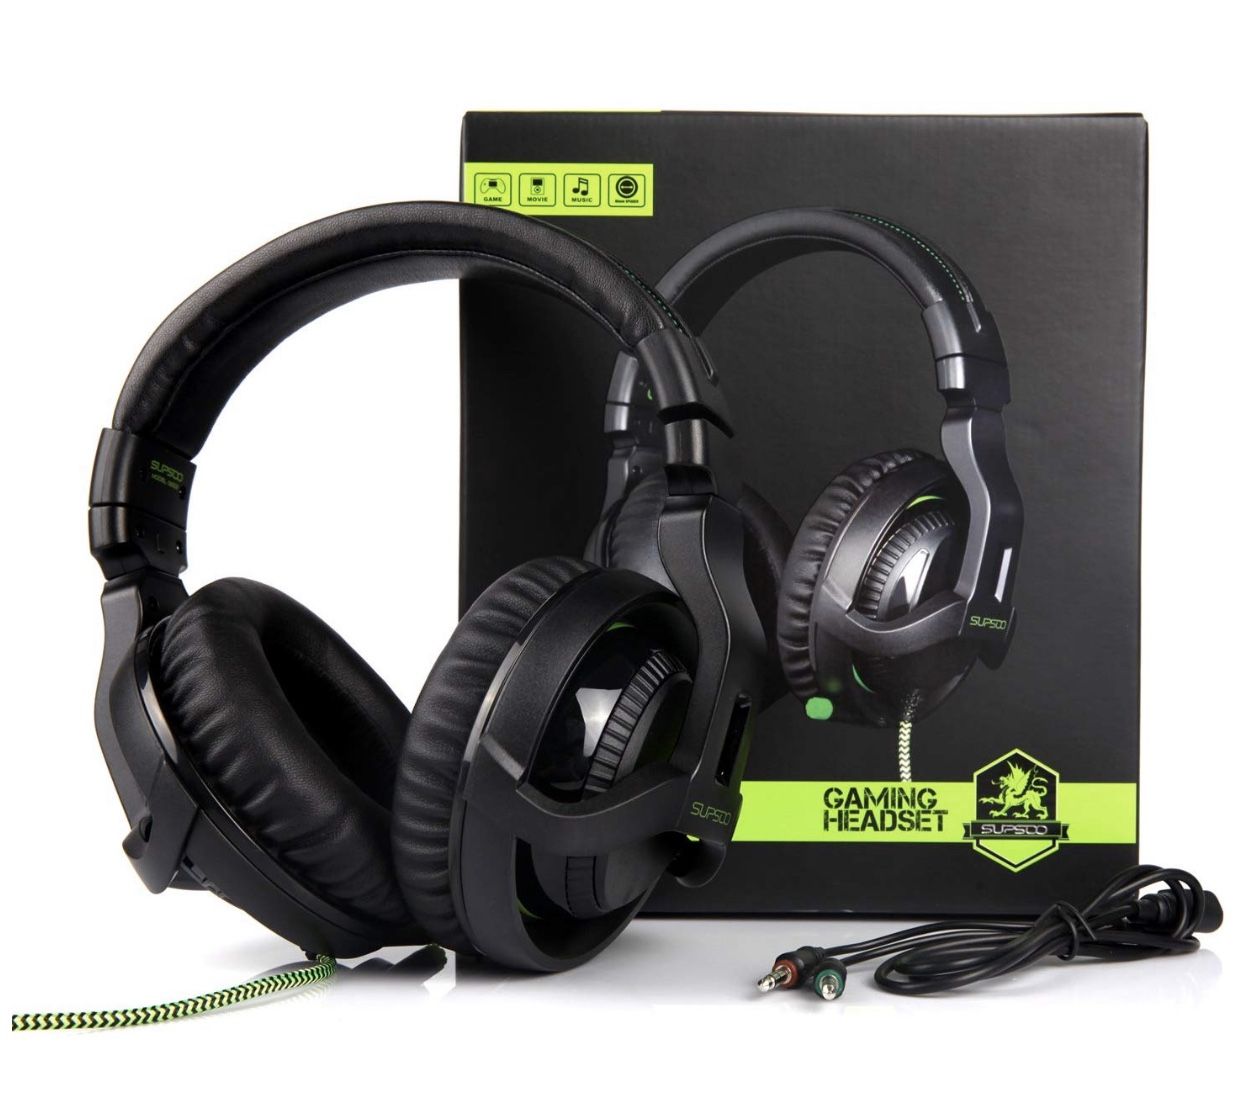 Supsoo Gaming Headset for PS4/Xbox one/PC Headphones Surround Sound & Volume Controls